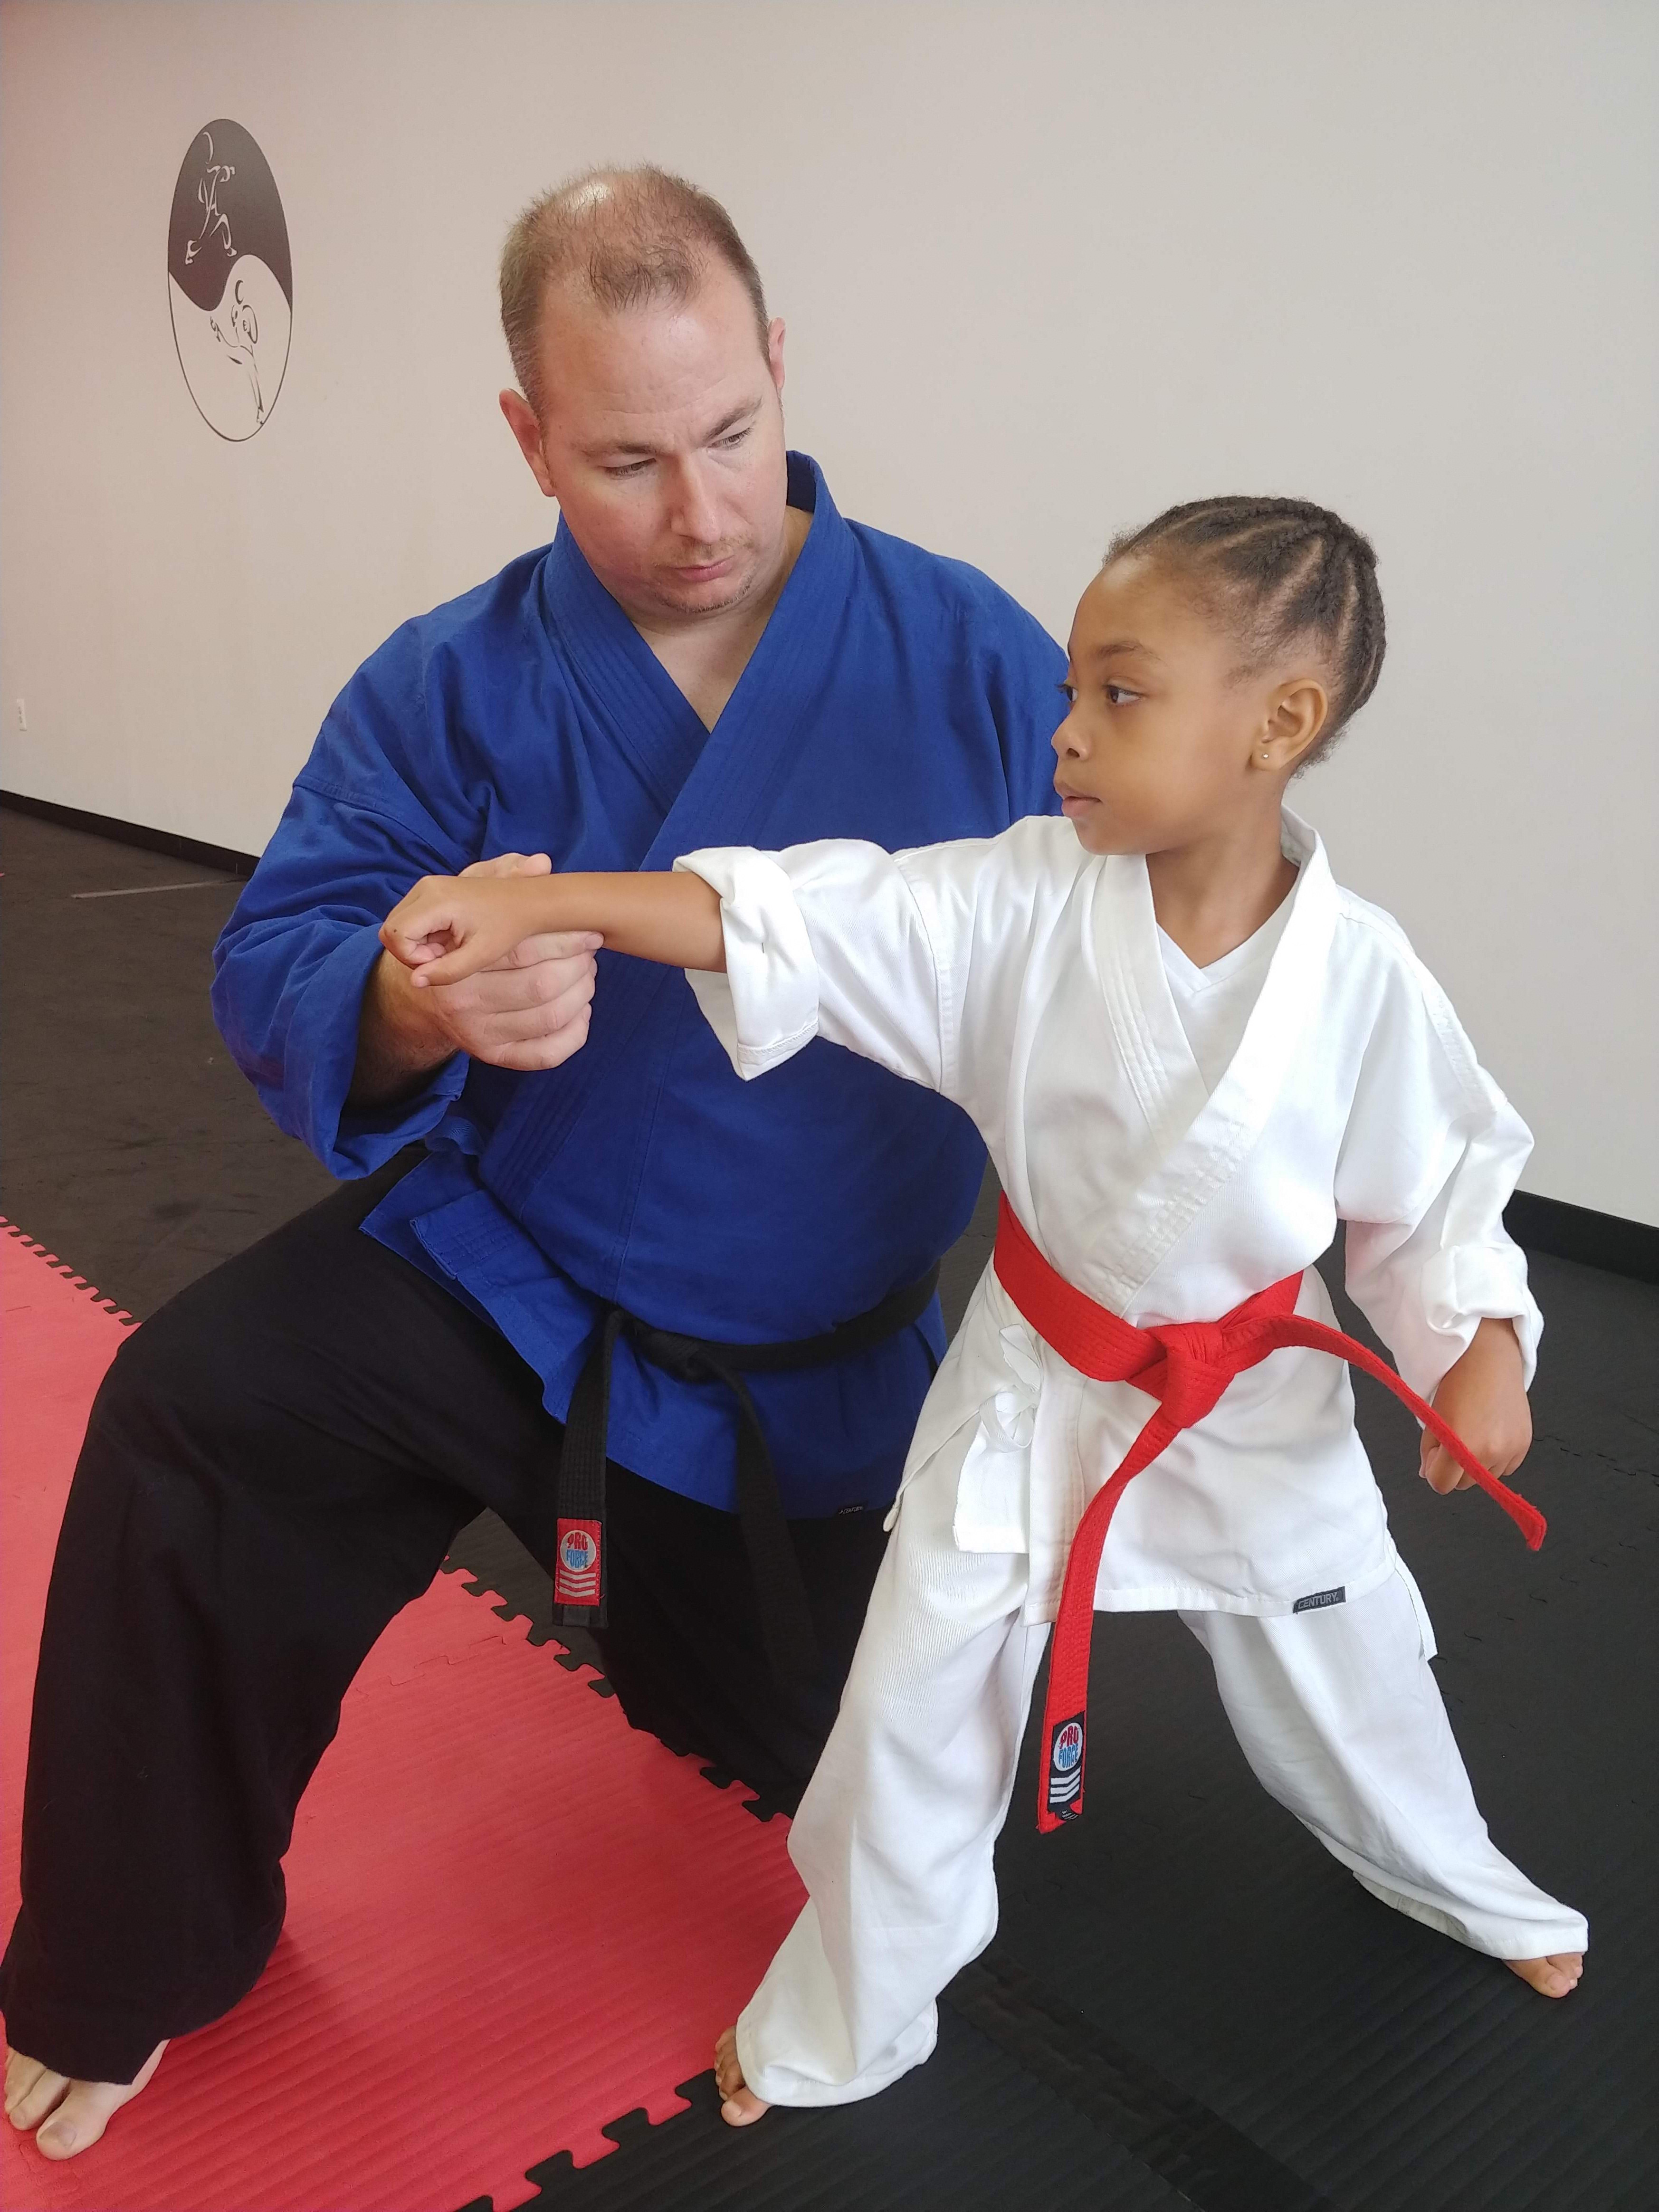 //www.fitnessmartialartsmd.com/wp-content/uploads/2019/04/private-lessons-pic-1-2.jpg